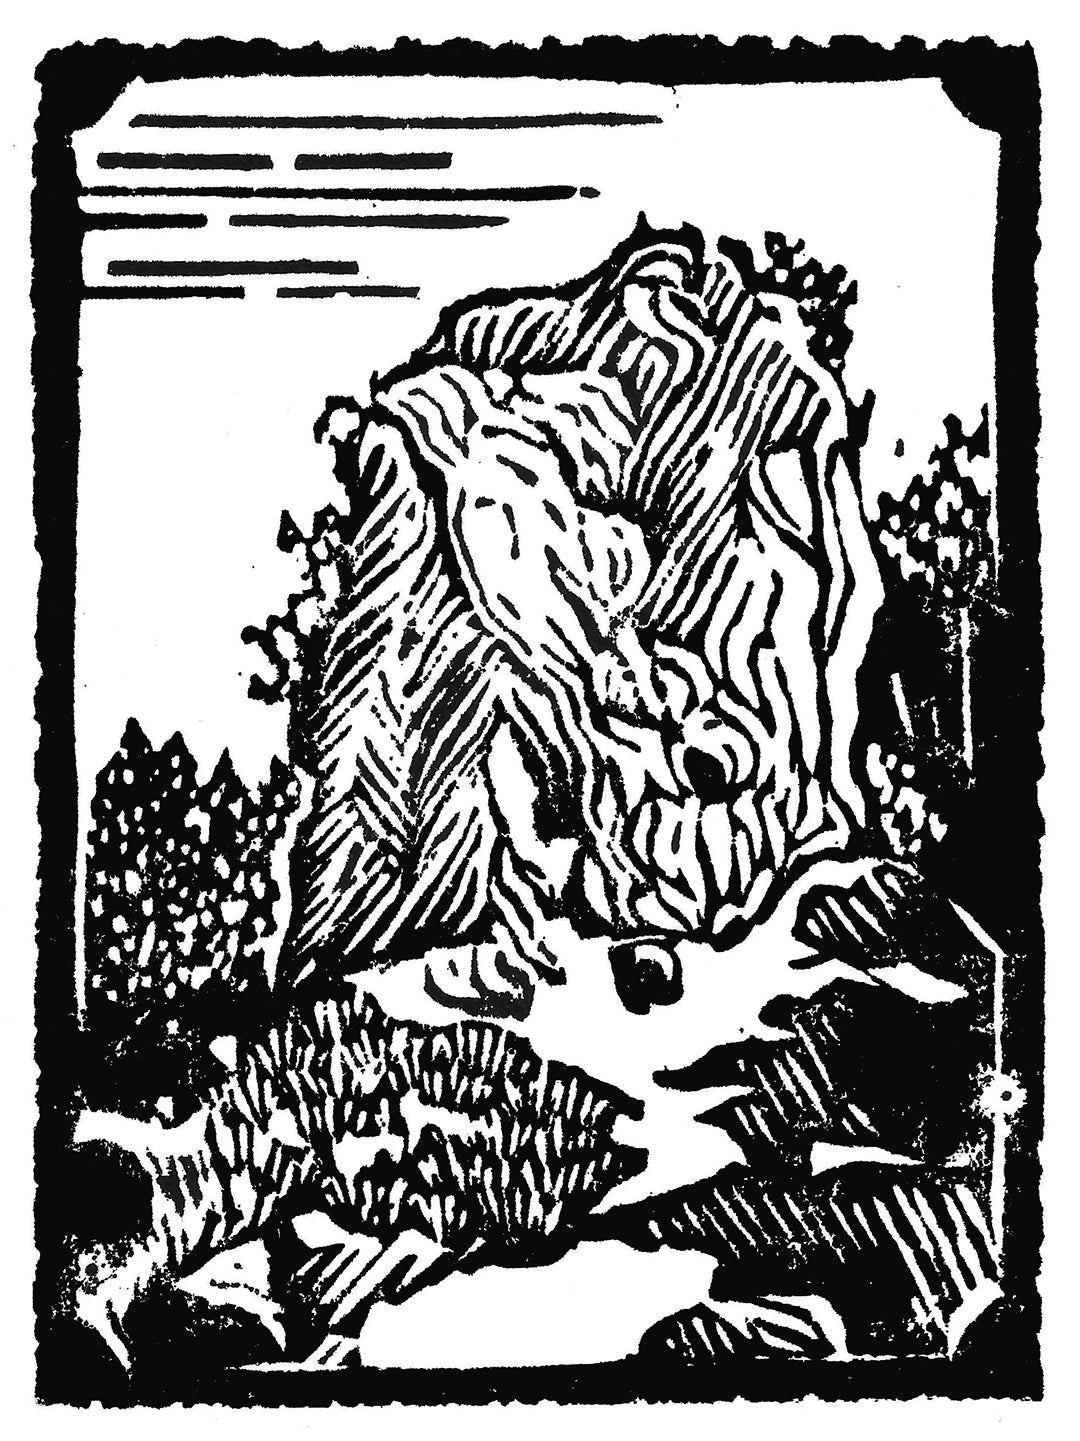 Original one-color linoleum block print by Michigan artist Natalia Wohletz of Peninsula Prints. This print design was inspired by the beautiful bluff limestone rock formations found in the Mackinac Island State Park.